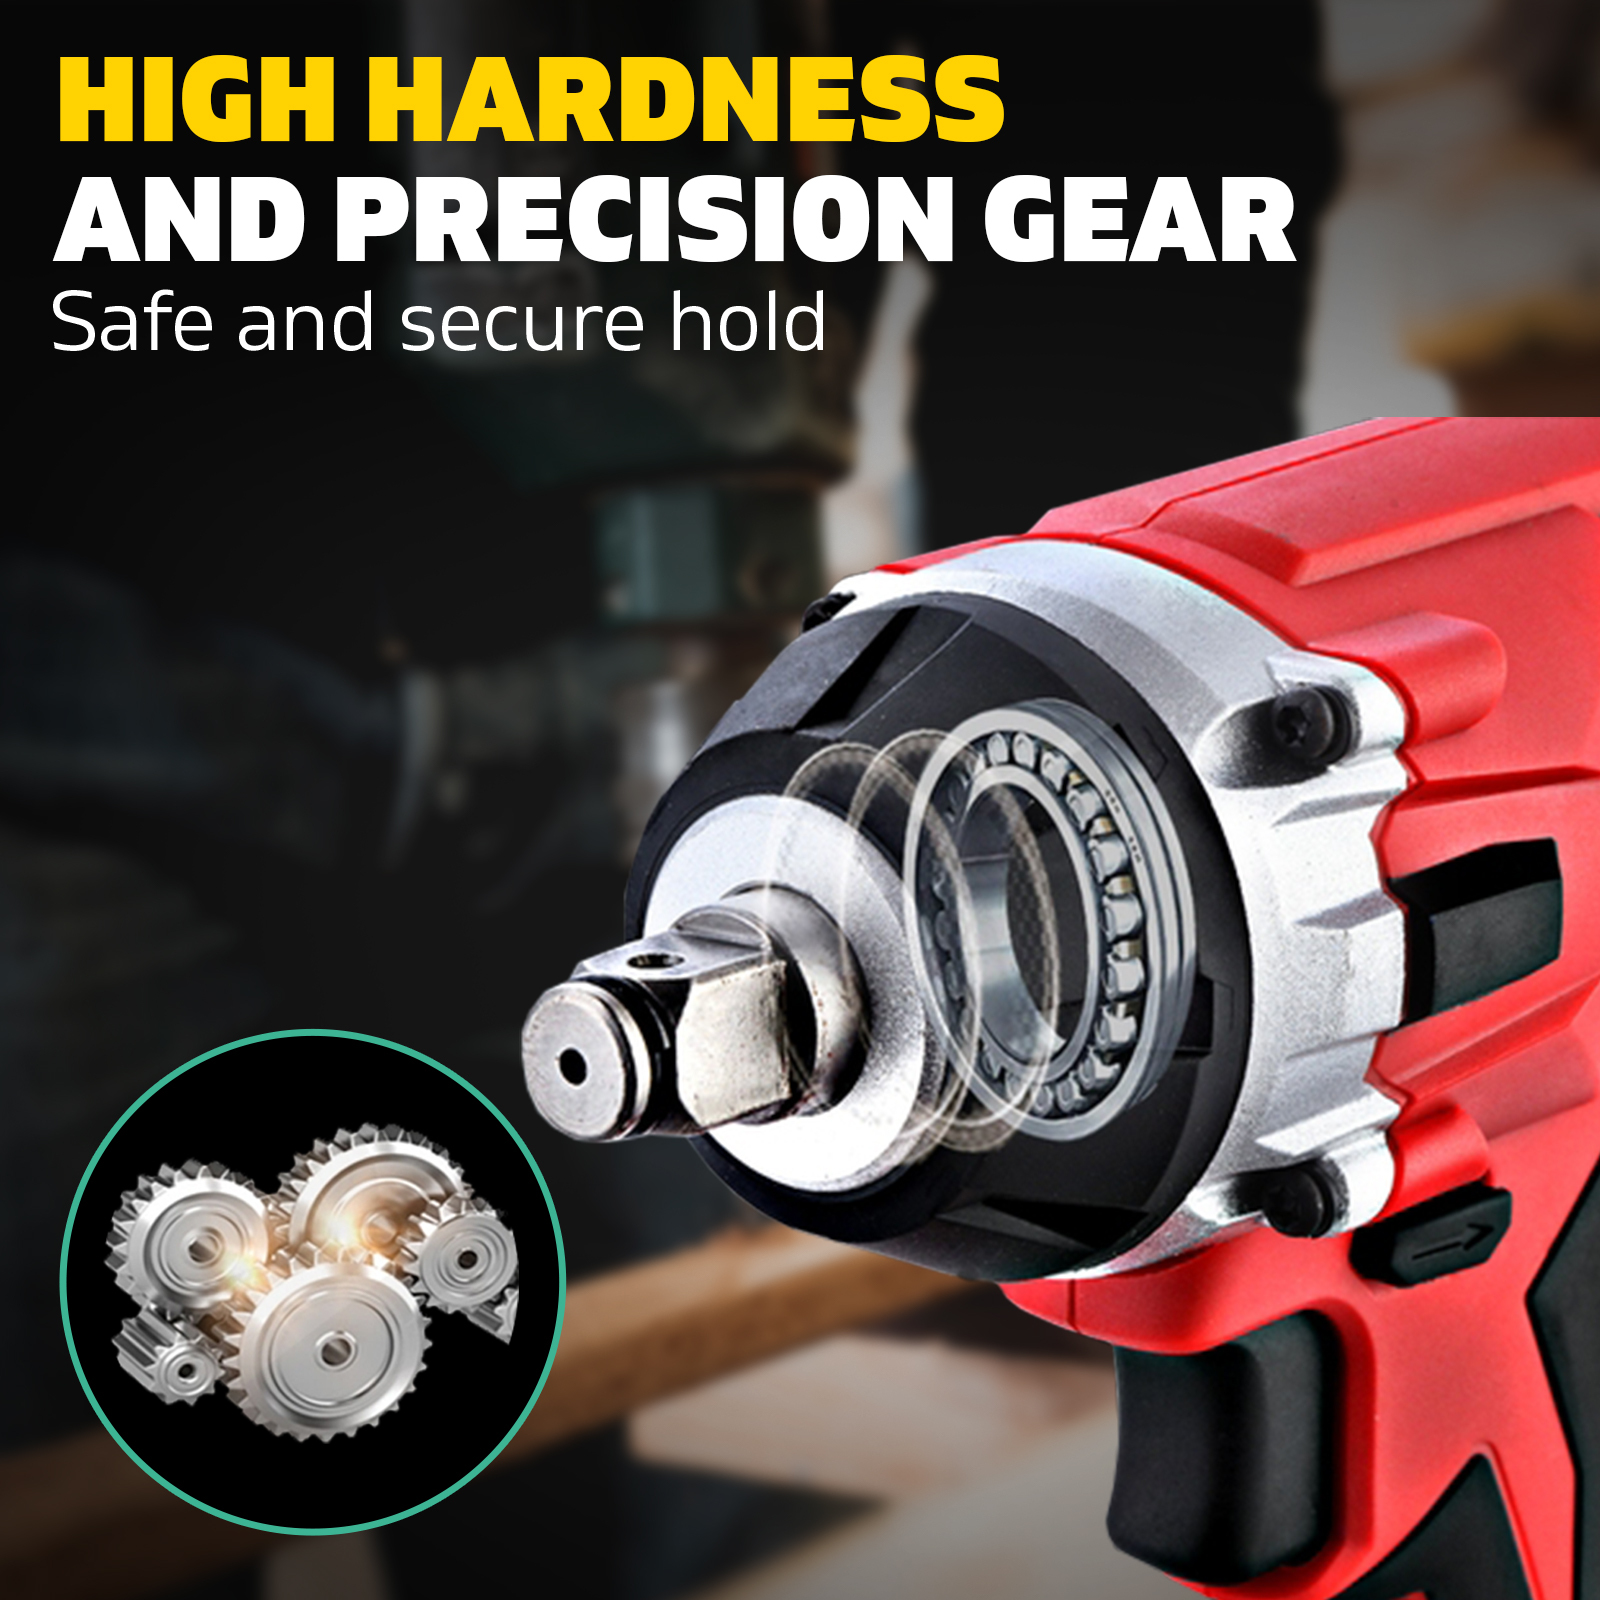 Impact Wrench 20V Cordless Rattle Gun Sockets Lithium-Ion Battery 